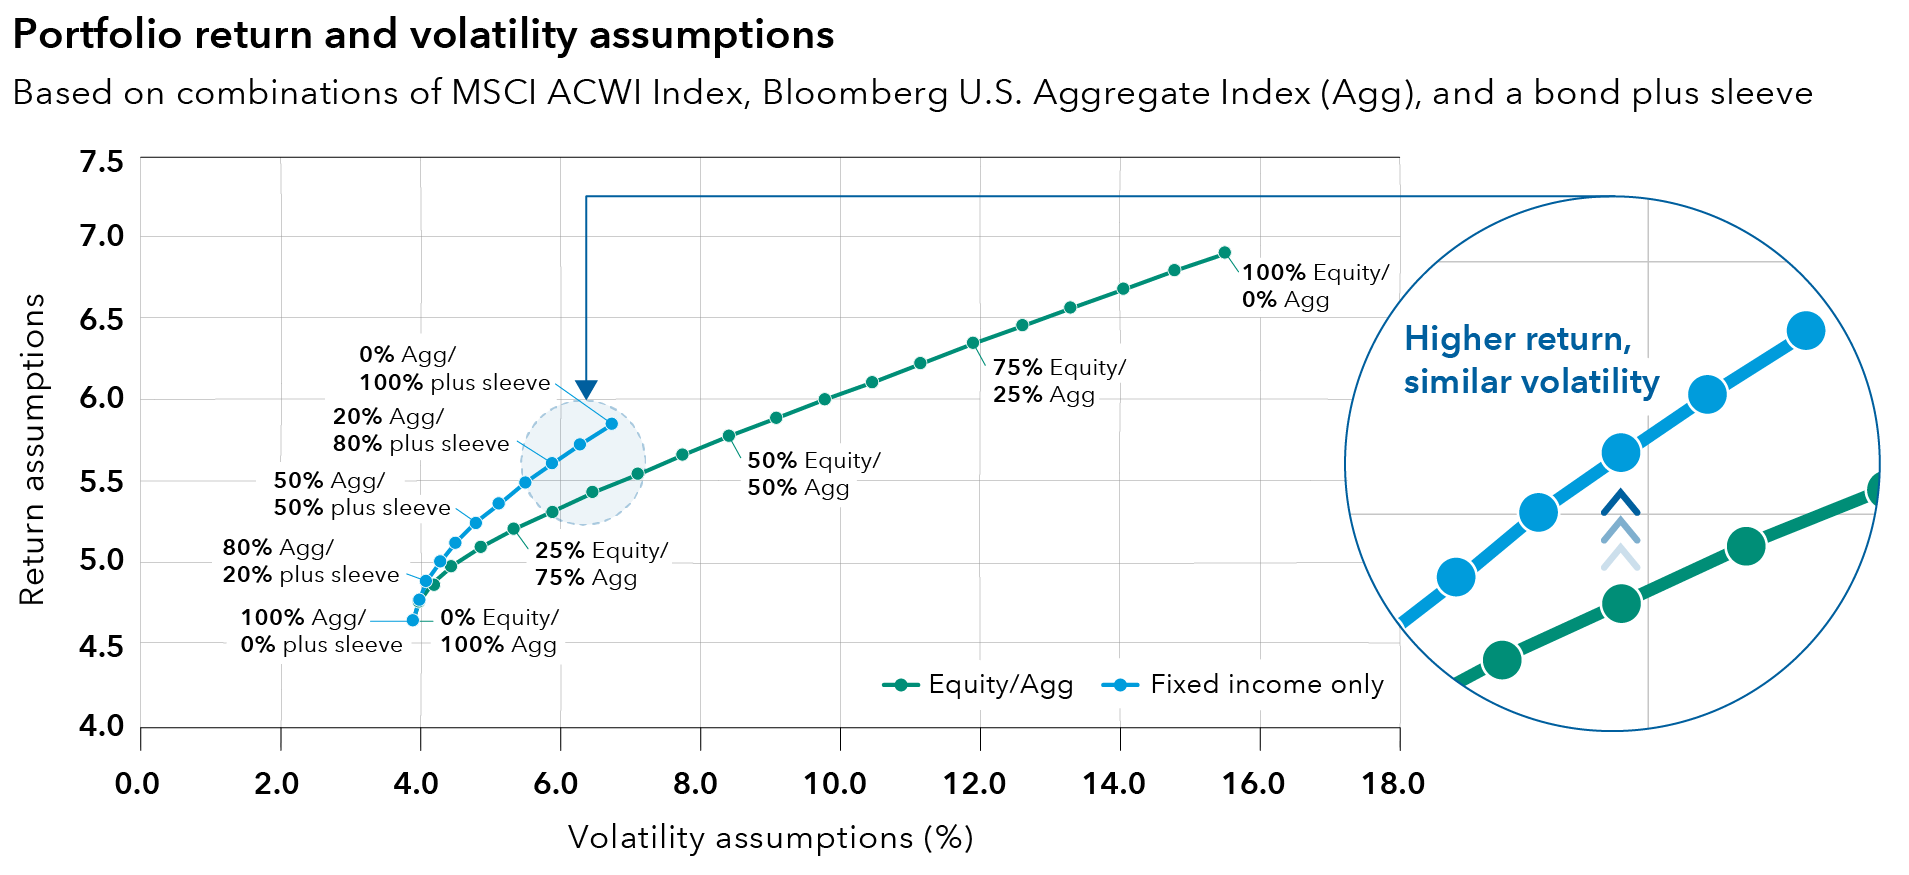 This is a scatterplot chart with return assumptions (as a percentage) shown on the Y axis and volatility assumptions, or standard deviation shown on the X axis (as a percentage). The chart shows two types of dots. Blue dots represent an all-fixed-income portfolio with two components: Bloomberg U.S. Aggregate Index (Agg) and a plus sleeve with three equally weighted components: 1) 50% J.P. Morgan Emerging Markets Bond Index Global Diversified Index/50% J.P. Morgan GBI-EM Global Diversified, 2) Bloomberg U.S. High Yield Index and 3) Bloomberg U.S. TIPS Index. Each blue dot corresponds to a portfolio with a different allocation to the Agg and to the plus sleeve, varying from 100% Agg and 0% plus sleeve to 0% Agg and 100% plus sleeve. The blue dots are connected by a blue line to form what is typically referred to as an “efficient frontier.” There are green dots showing portfolios that are different combinations of two components: The MSCI All Country World (ACWI) Index, representing global equity, and the Agg. The green-dotted portfolios do not include any plus sleeve allocation. The green-dot portfolios range from 0% Agg and 100% equity (ACWI) to 100% Agg and 0% equity (ACWI). The green dots are also connected to form a green line. Between approximately the green dot 100% Equity/0% Agg (at left) and the green dot 40% Equity/60% Agg, the viewer can see the blue line running roughly parallel and above that section of the green line. The blue line does not extend rightward past that point. The gap between the blue and green line grows from the left to the right over that section. A magnifying glass element zooms into that section of the chart, which is blown up in an area to the right of the chart. An arrow can be seen pointing upward from that zoom-in section of the green line to the blue line above it. Next to the up arrow are the words “higher return, similar volatility.” If one turns away from the magnified visual element and back to the chart, the green line continues rightward and upward roughly diagonally as it goes past the terminus of the blue line (corresponding to 0% Agg/100% plus sleeve). The blue data points noted in the chart are as follows — 100% Agg/0% plus sleeve: 3.9% volatility, 4.7% return; 80% Agg/20% plus sleeve: 4.1% volatility, 4.9% return; 50% Agg/50% plus sleeve: 4.8% volatility, 5.3% return; 20% Agg/80% plus sleeve: 5.9% volatility, 5.6% return; and 0% Agg/100% plus sleeve: 6.8% volatility, 5.9% return. The green data points noted in the chart are as follows — 100% equity/0% Agg: 15.6% volatility, 6.9% return; 75% Equity/25% Agg: 11.9% volatility, 6.4% return; 50% equity/50% Agg: 8.5% volatility, 5.8% return; 25% equity/75% Agg: 5.4% volatility, 5.2% return, and 0% equity/0% Agg: 3.9% volatility, 4.7% return.